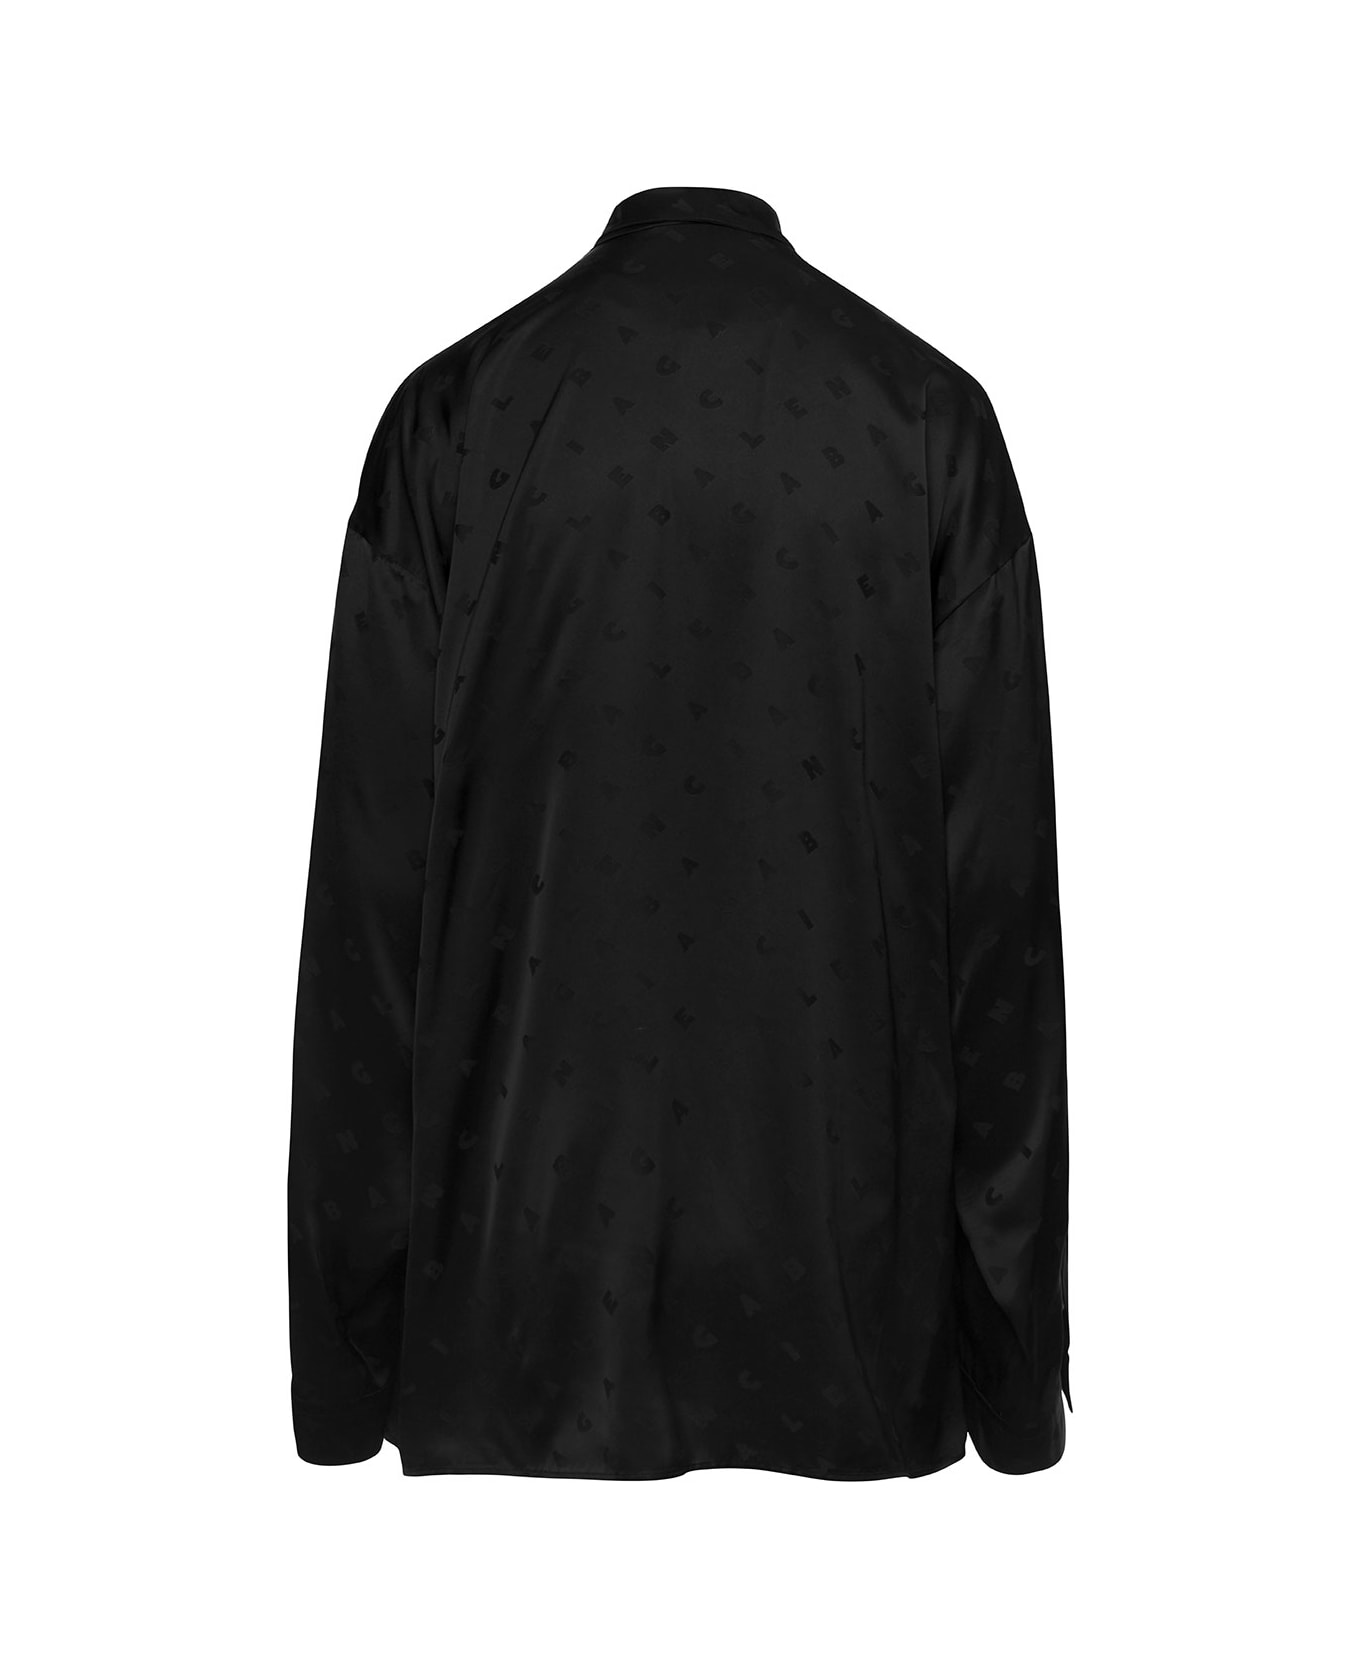 Balenciaga Oversize Black Hourglass Blouse All-over Logo Lettering With Long Panels On Collar In Viscose Woman - Black